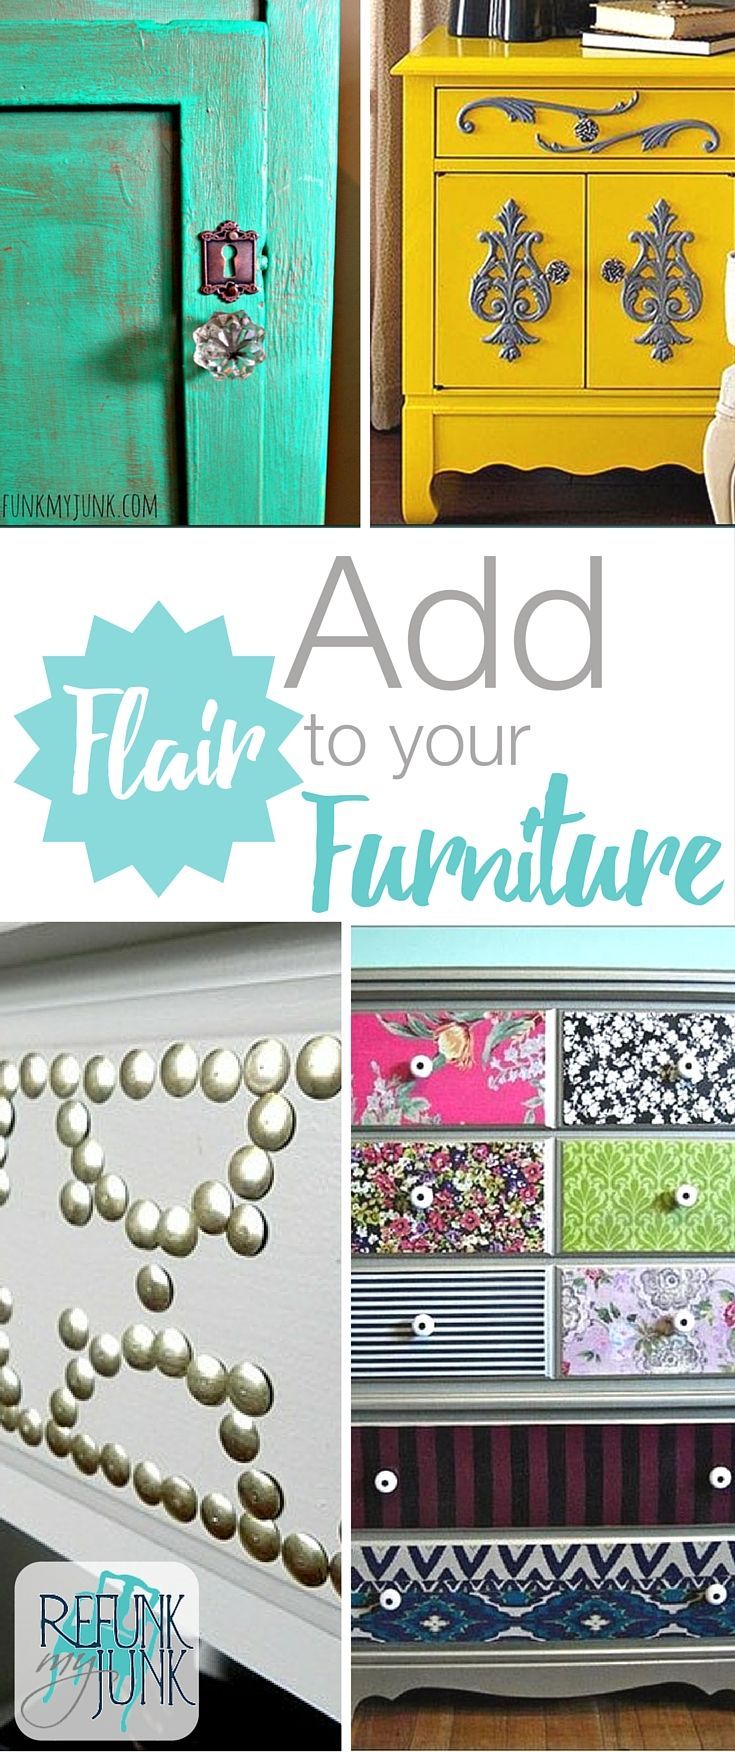 5 Ways to add flair to your furniture and other DIY furniture painting ideas and techniques by Refunk My Junk -   22 unique diy furniture
 ideas